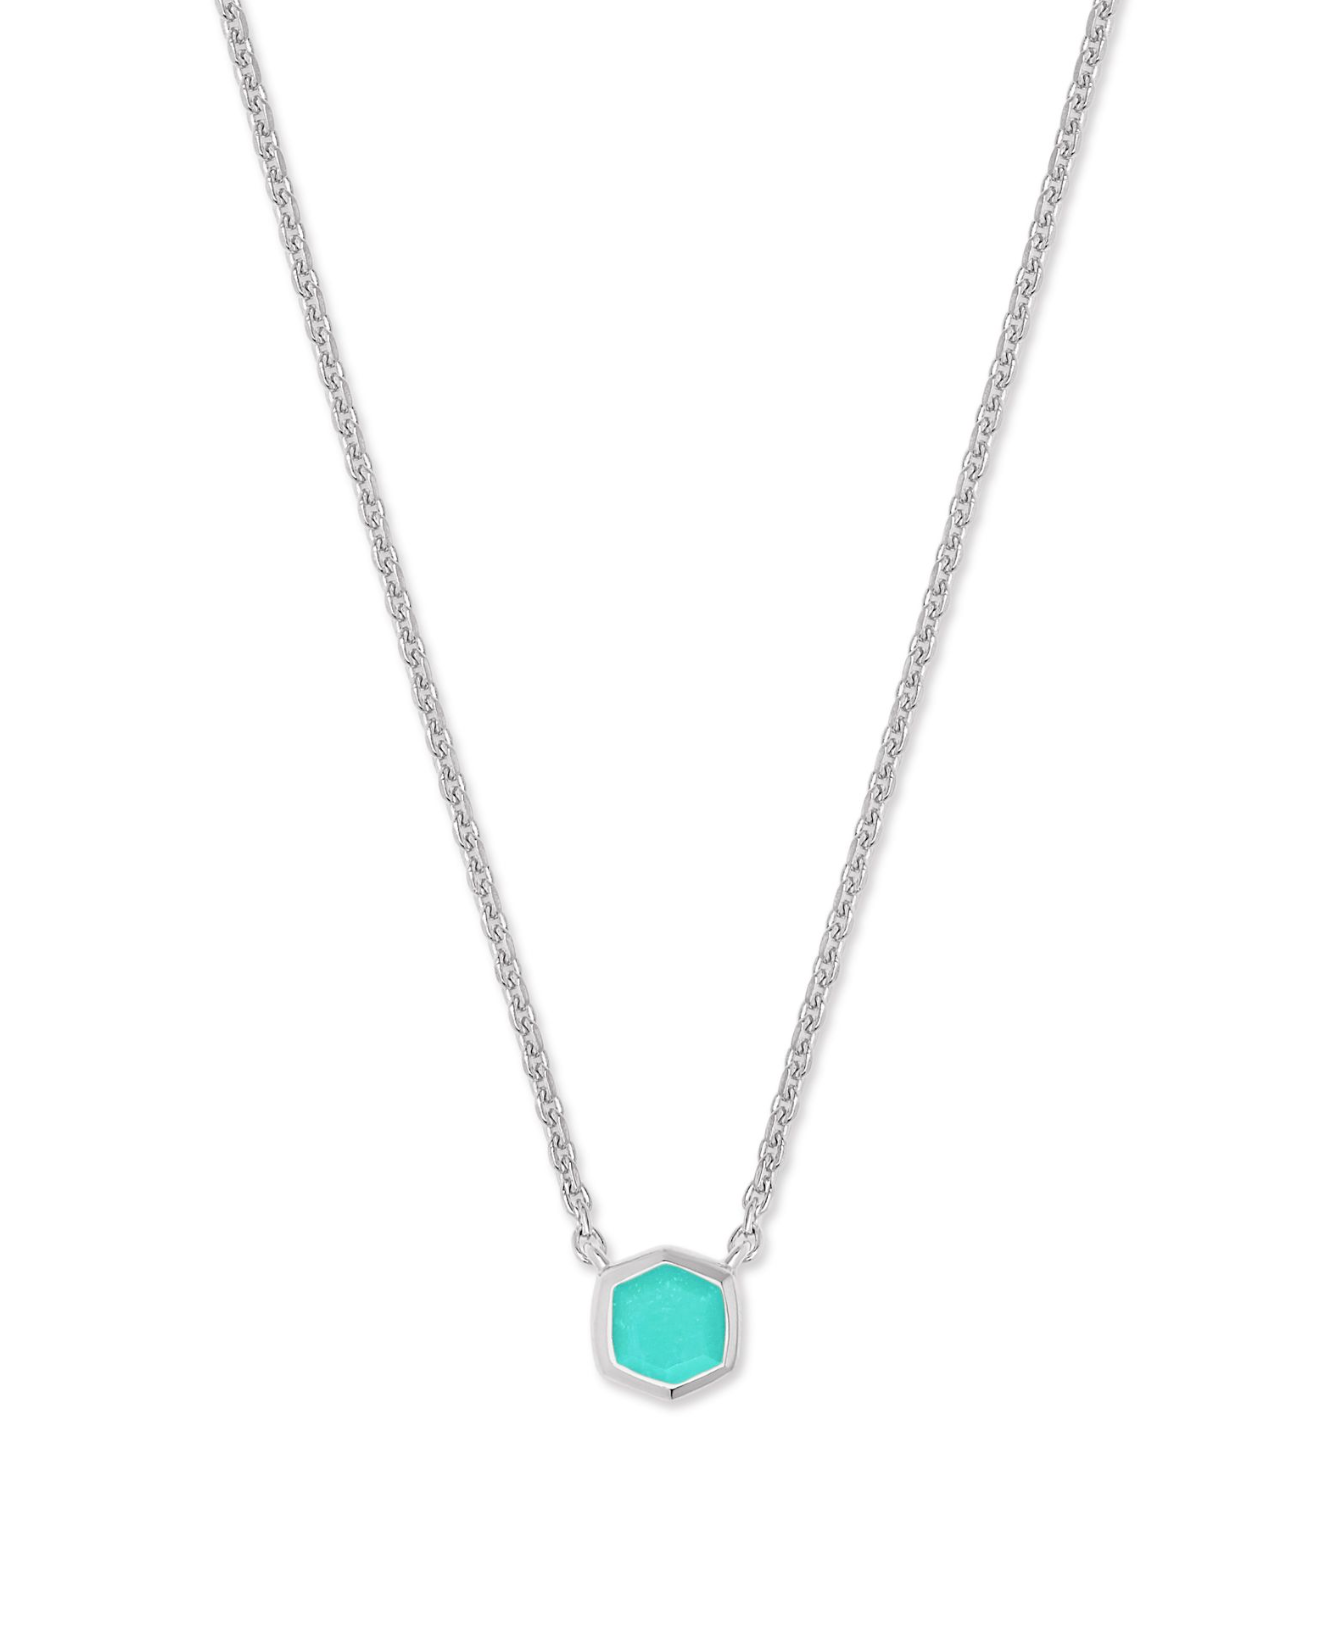 Davie Sterling Silver Pendant Necklace in Chrysoprase | KENDRA SCOTT - The Street Boutique 